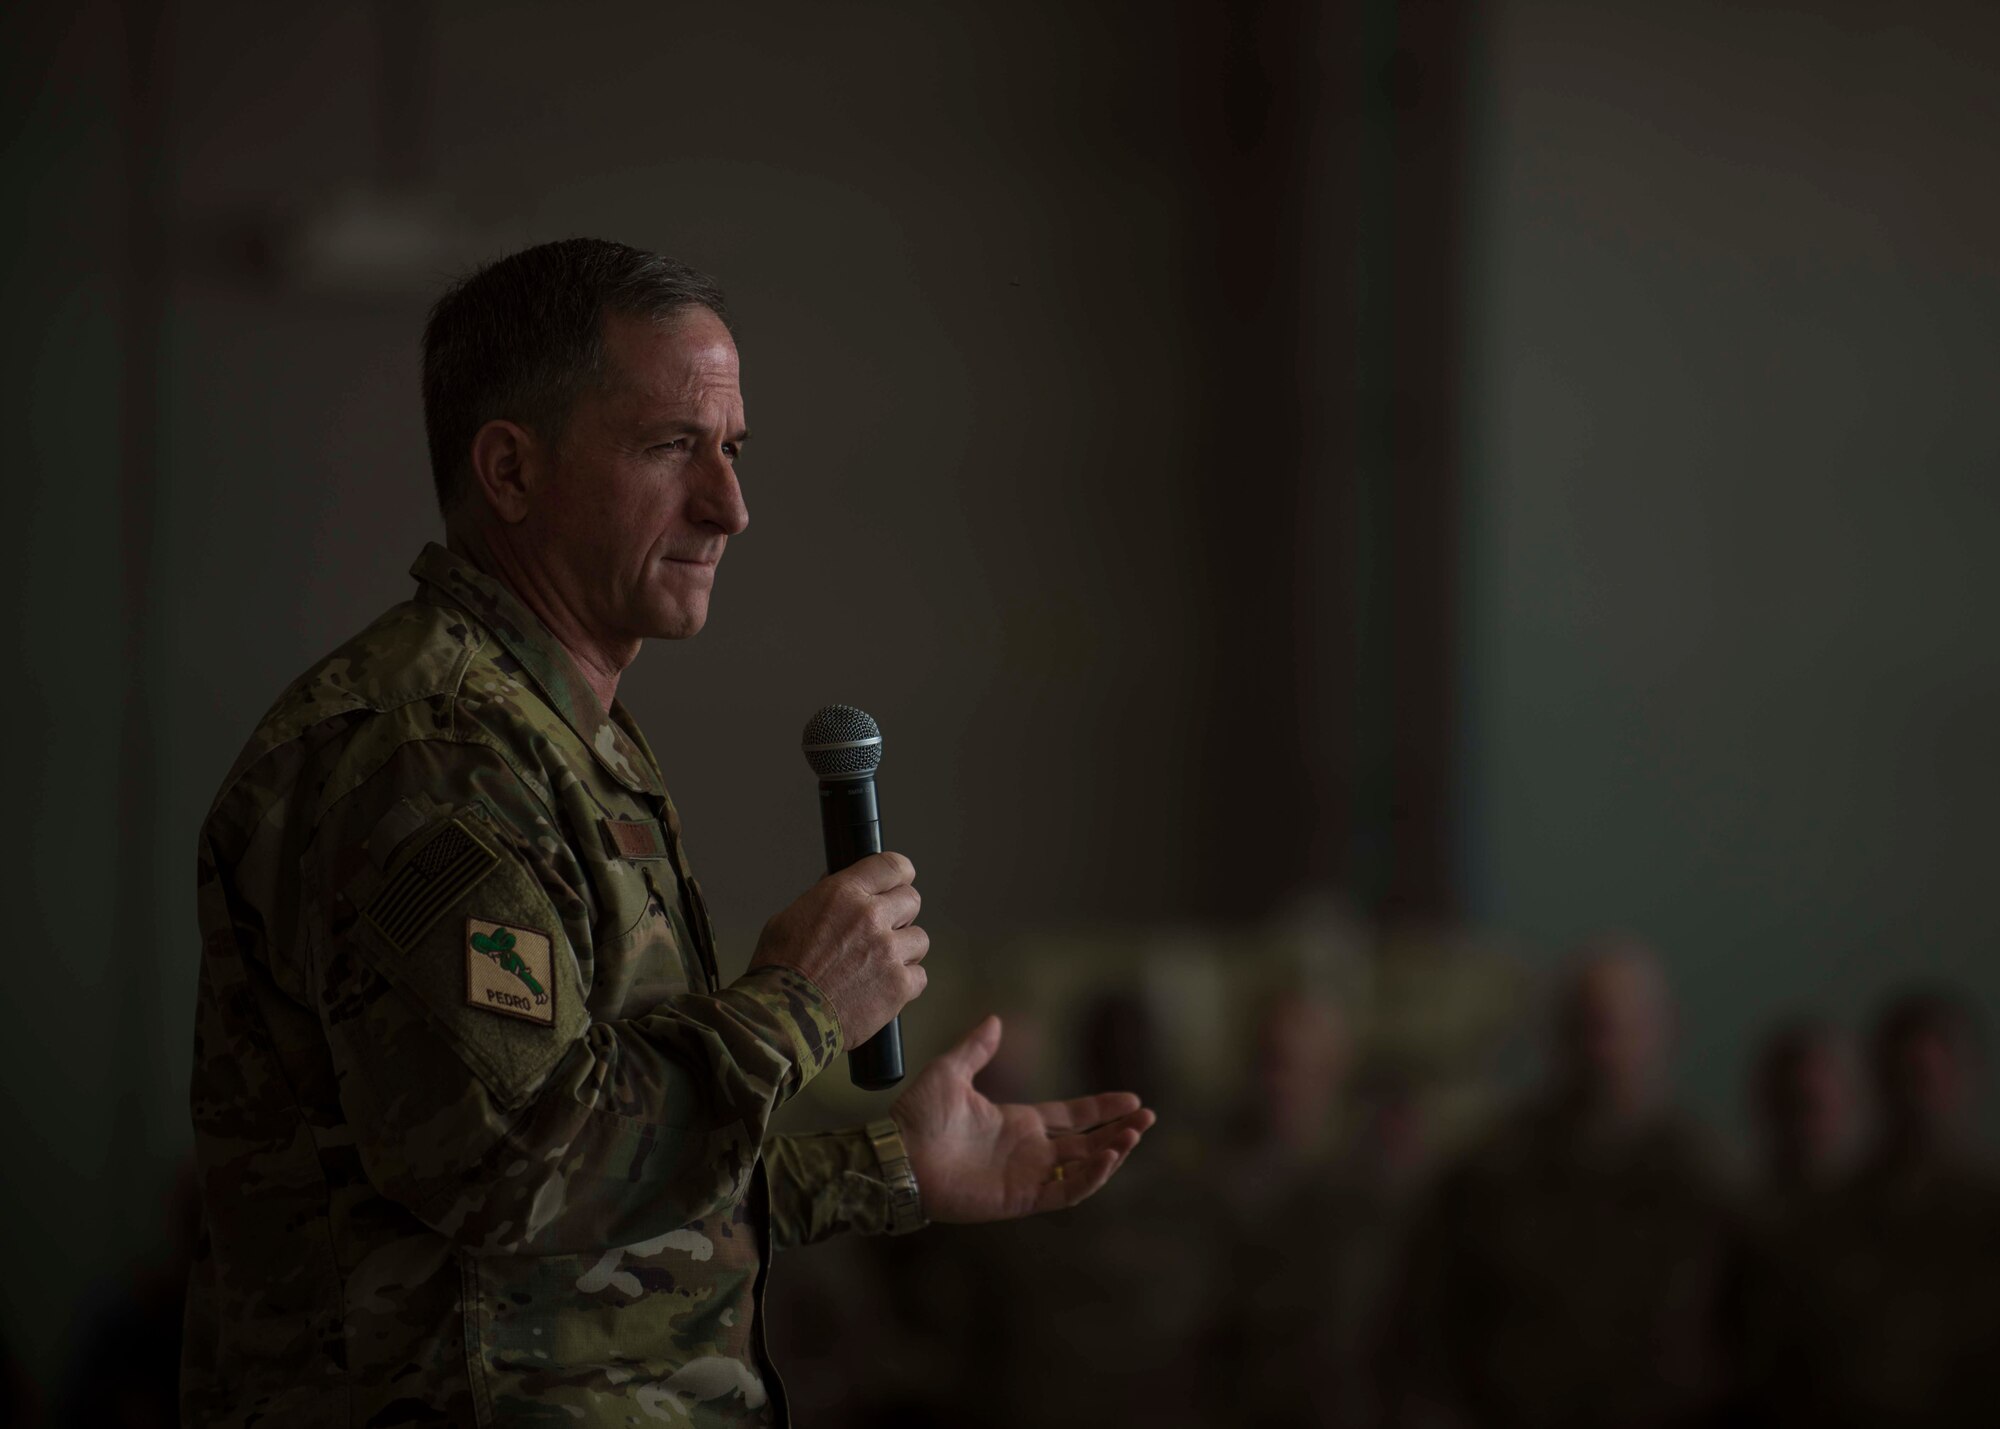 Air Force Chief of Staff Gen. David L. Goldfein speaks during an all call, Bagram Airfield, Afghanistan, Aug. 13, 2016. In his first visit as Chief of Staff to Bagram, Goldfein recognized several Airmen for outstanding performance and held an all call to talk about his top priorities and the future of the Air Force. (U.S. Air Force photo by Senior Airman Justyn M. Freeman)